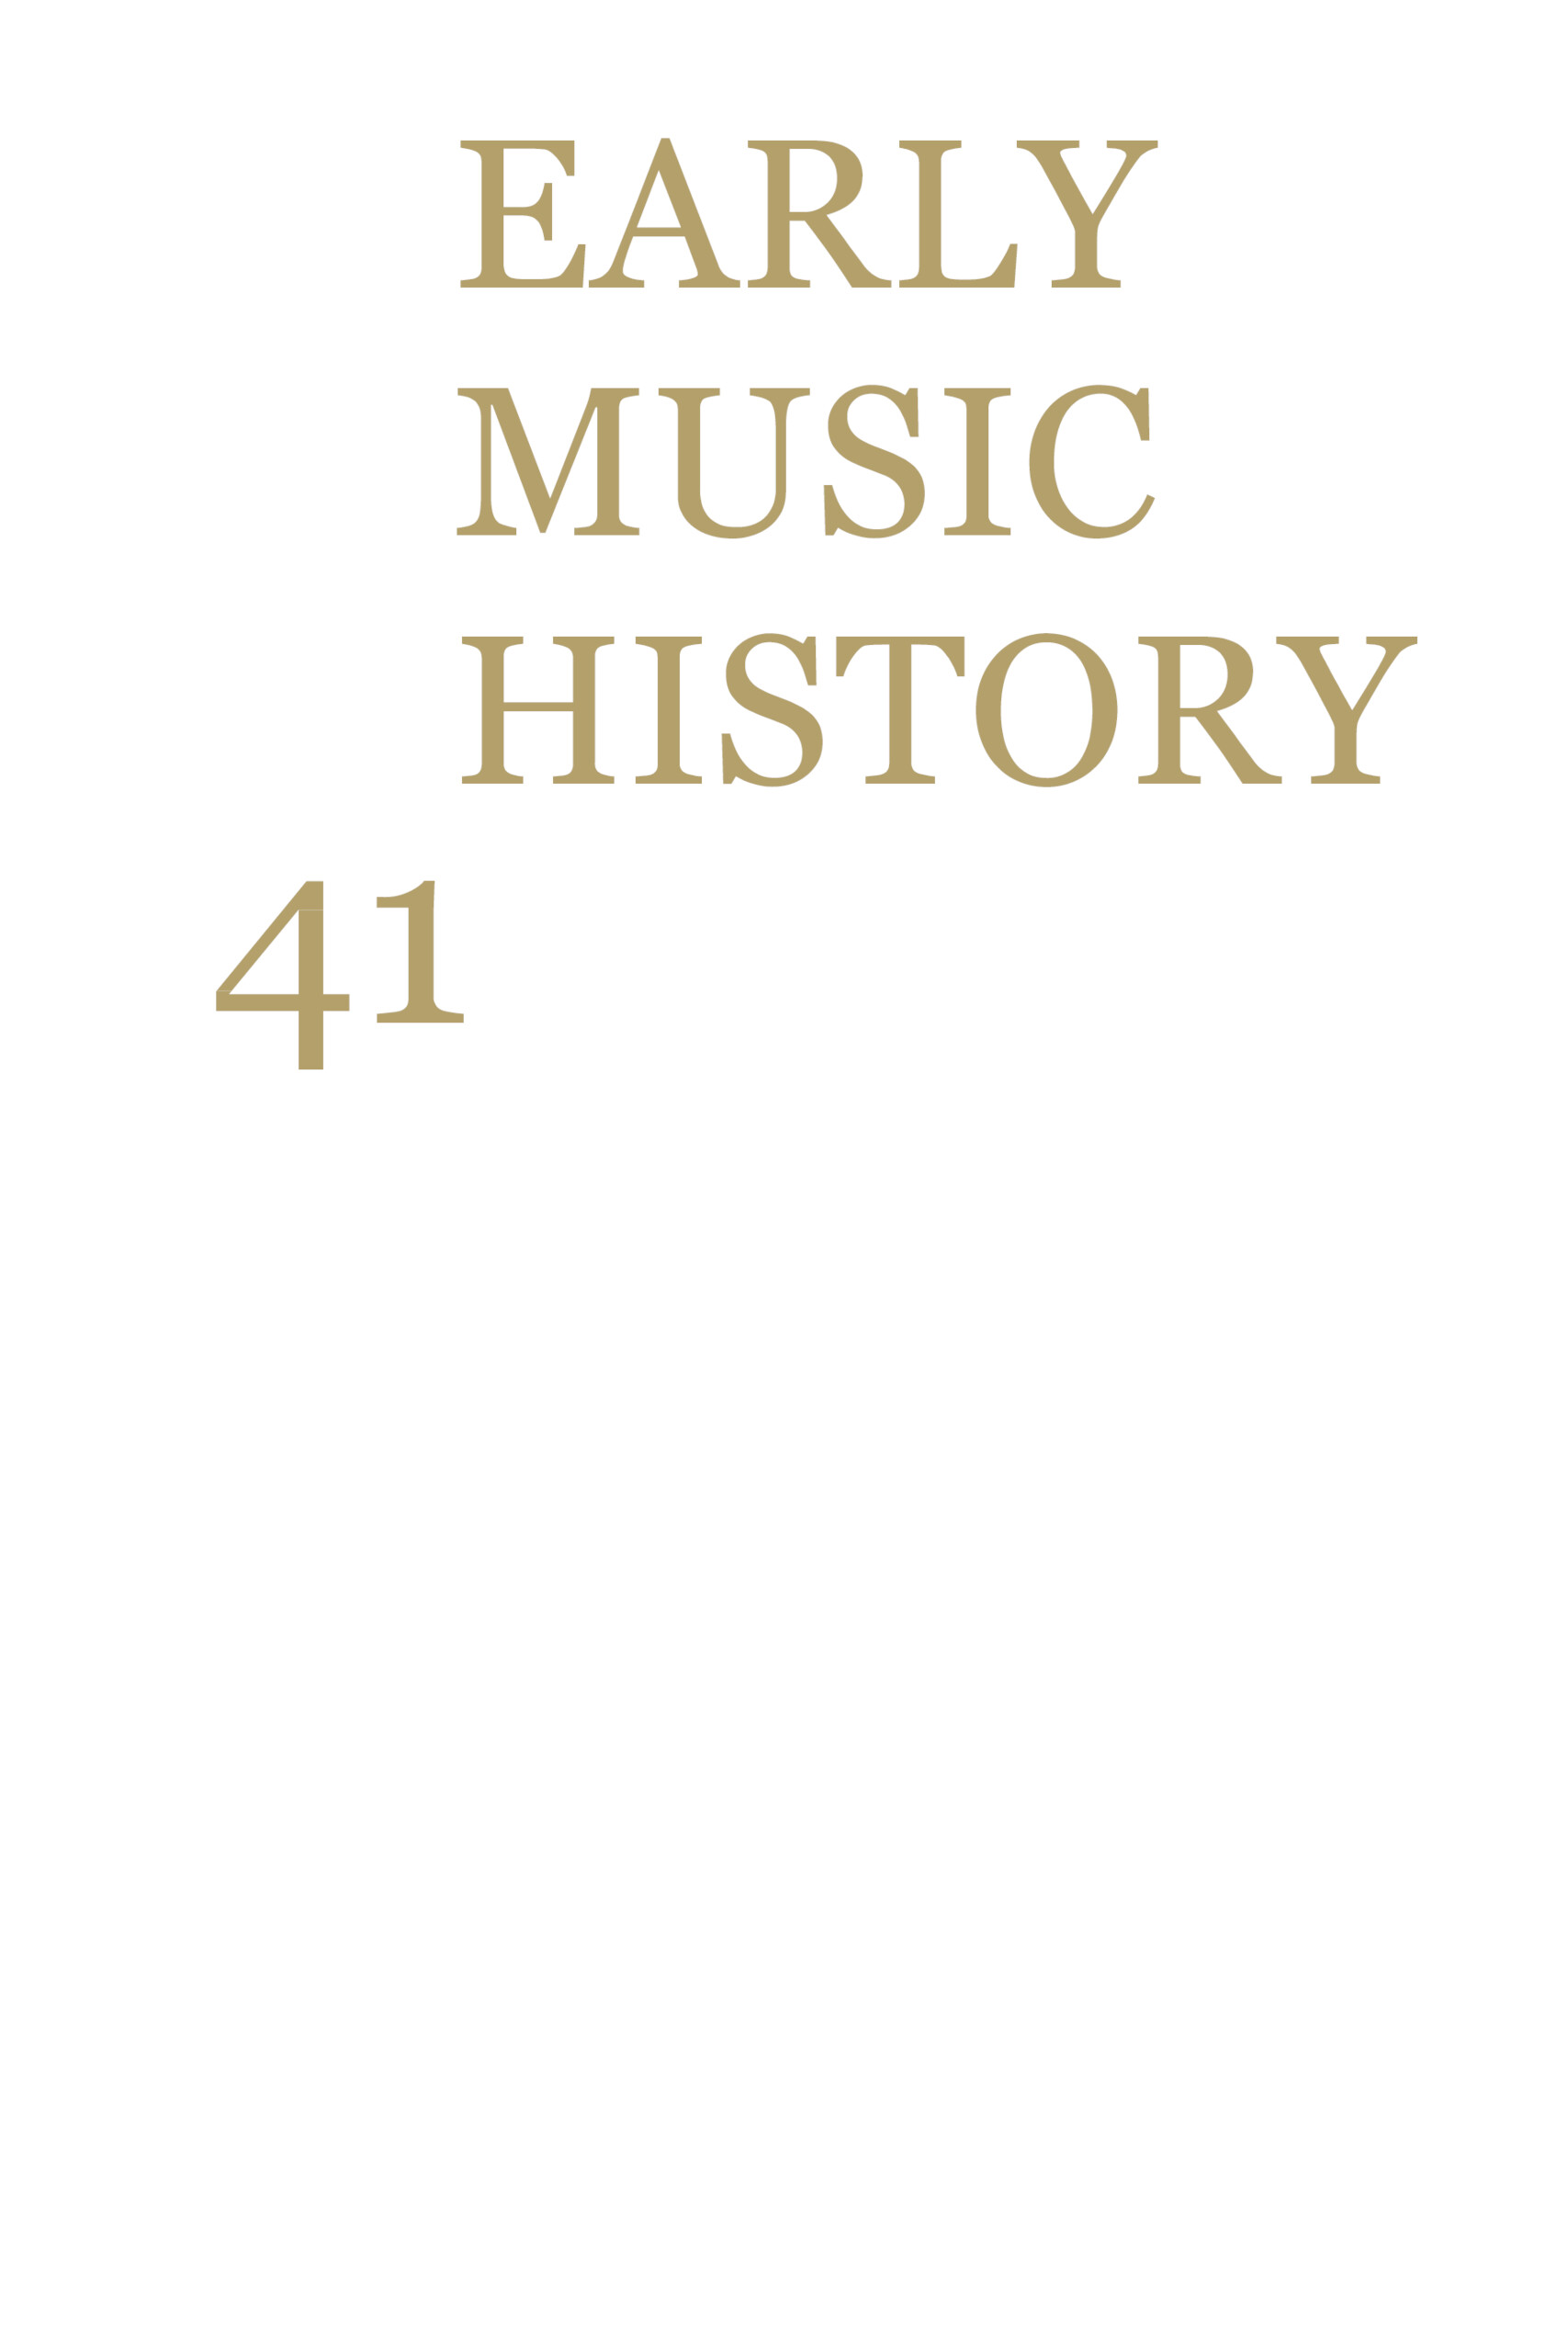 Cambridge history fifteenth century music | Medieval and 